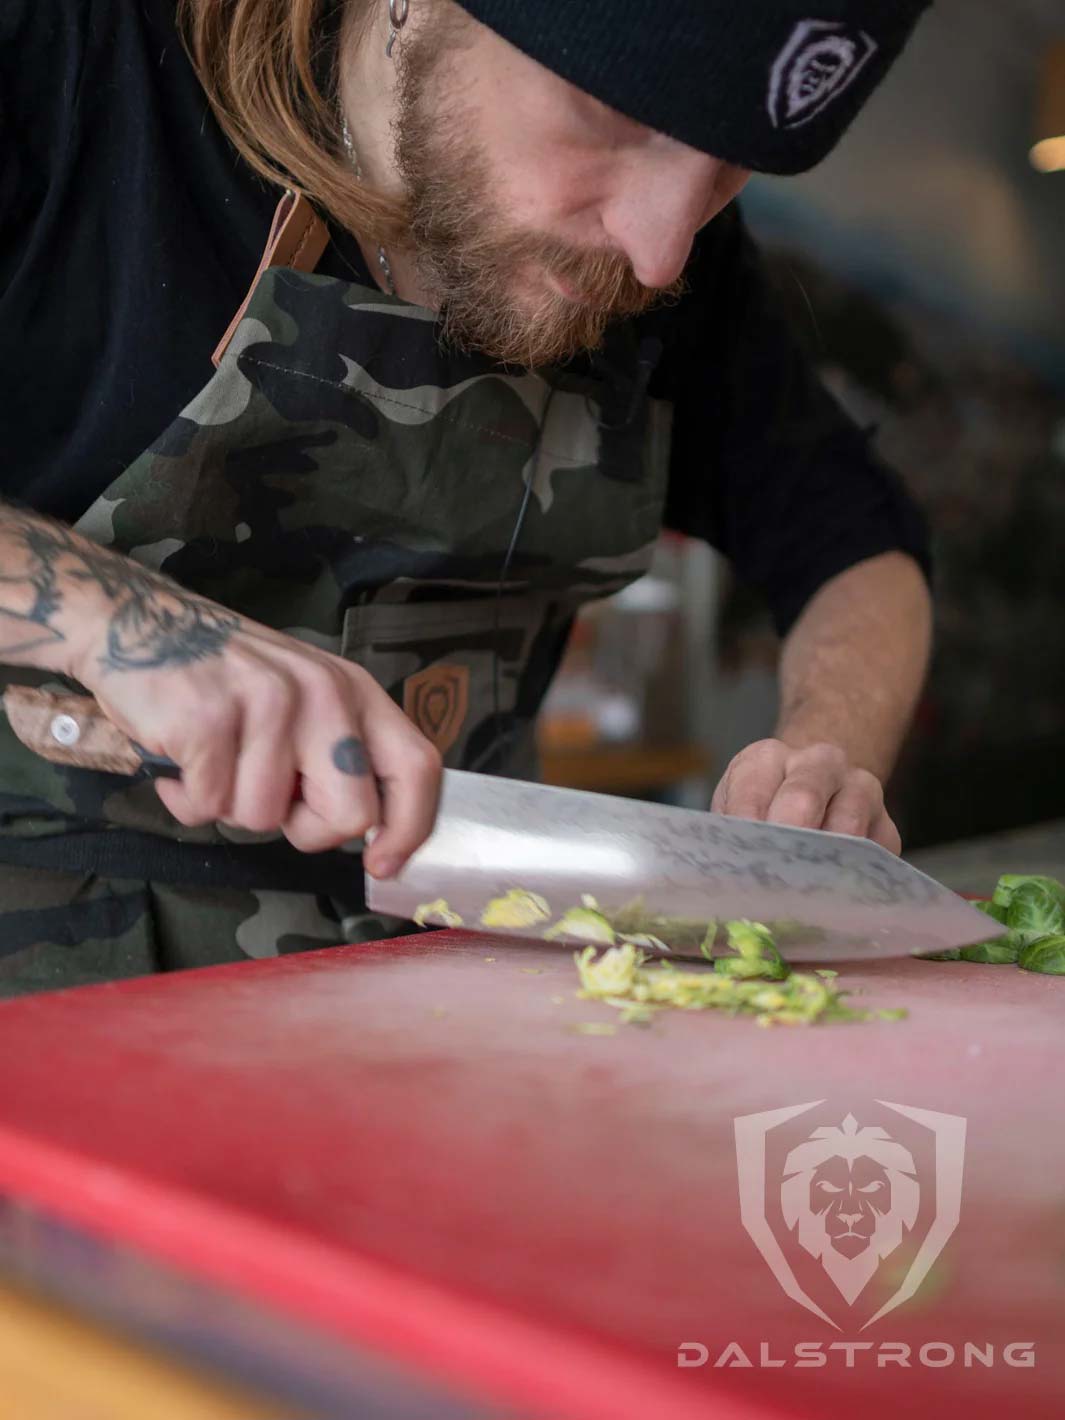 Dalstrong firestorm alpha series 9.5 inch chef knife with wooden handle slicing through a brussel sprout.